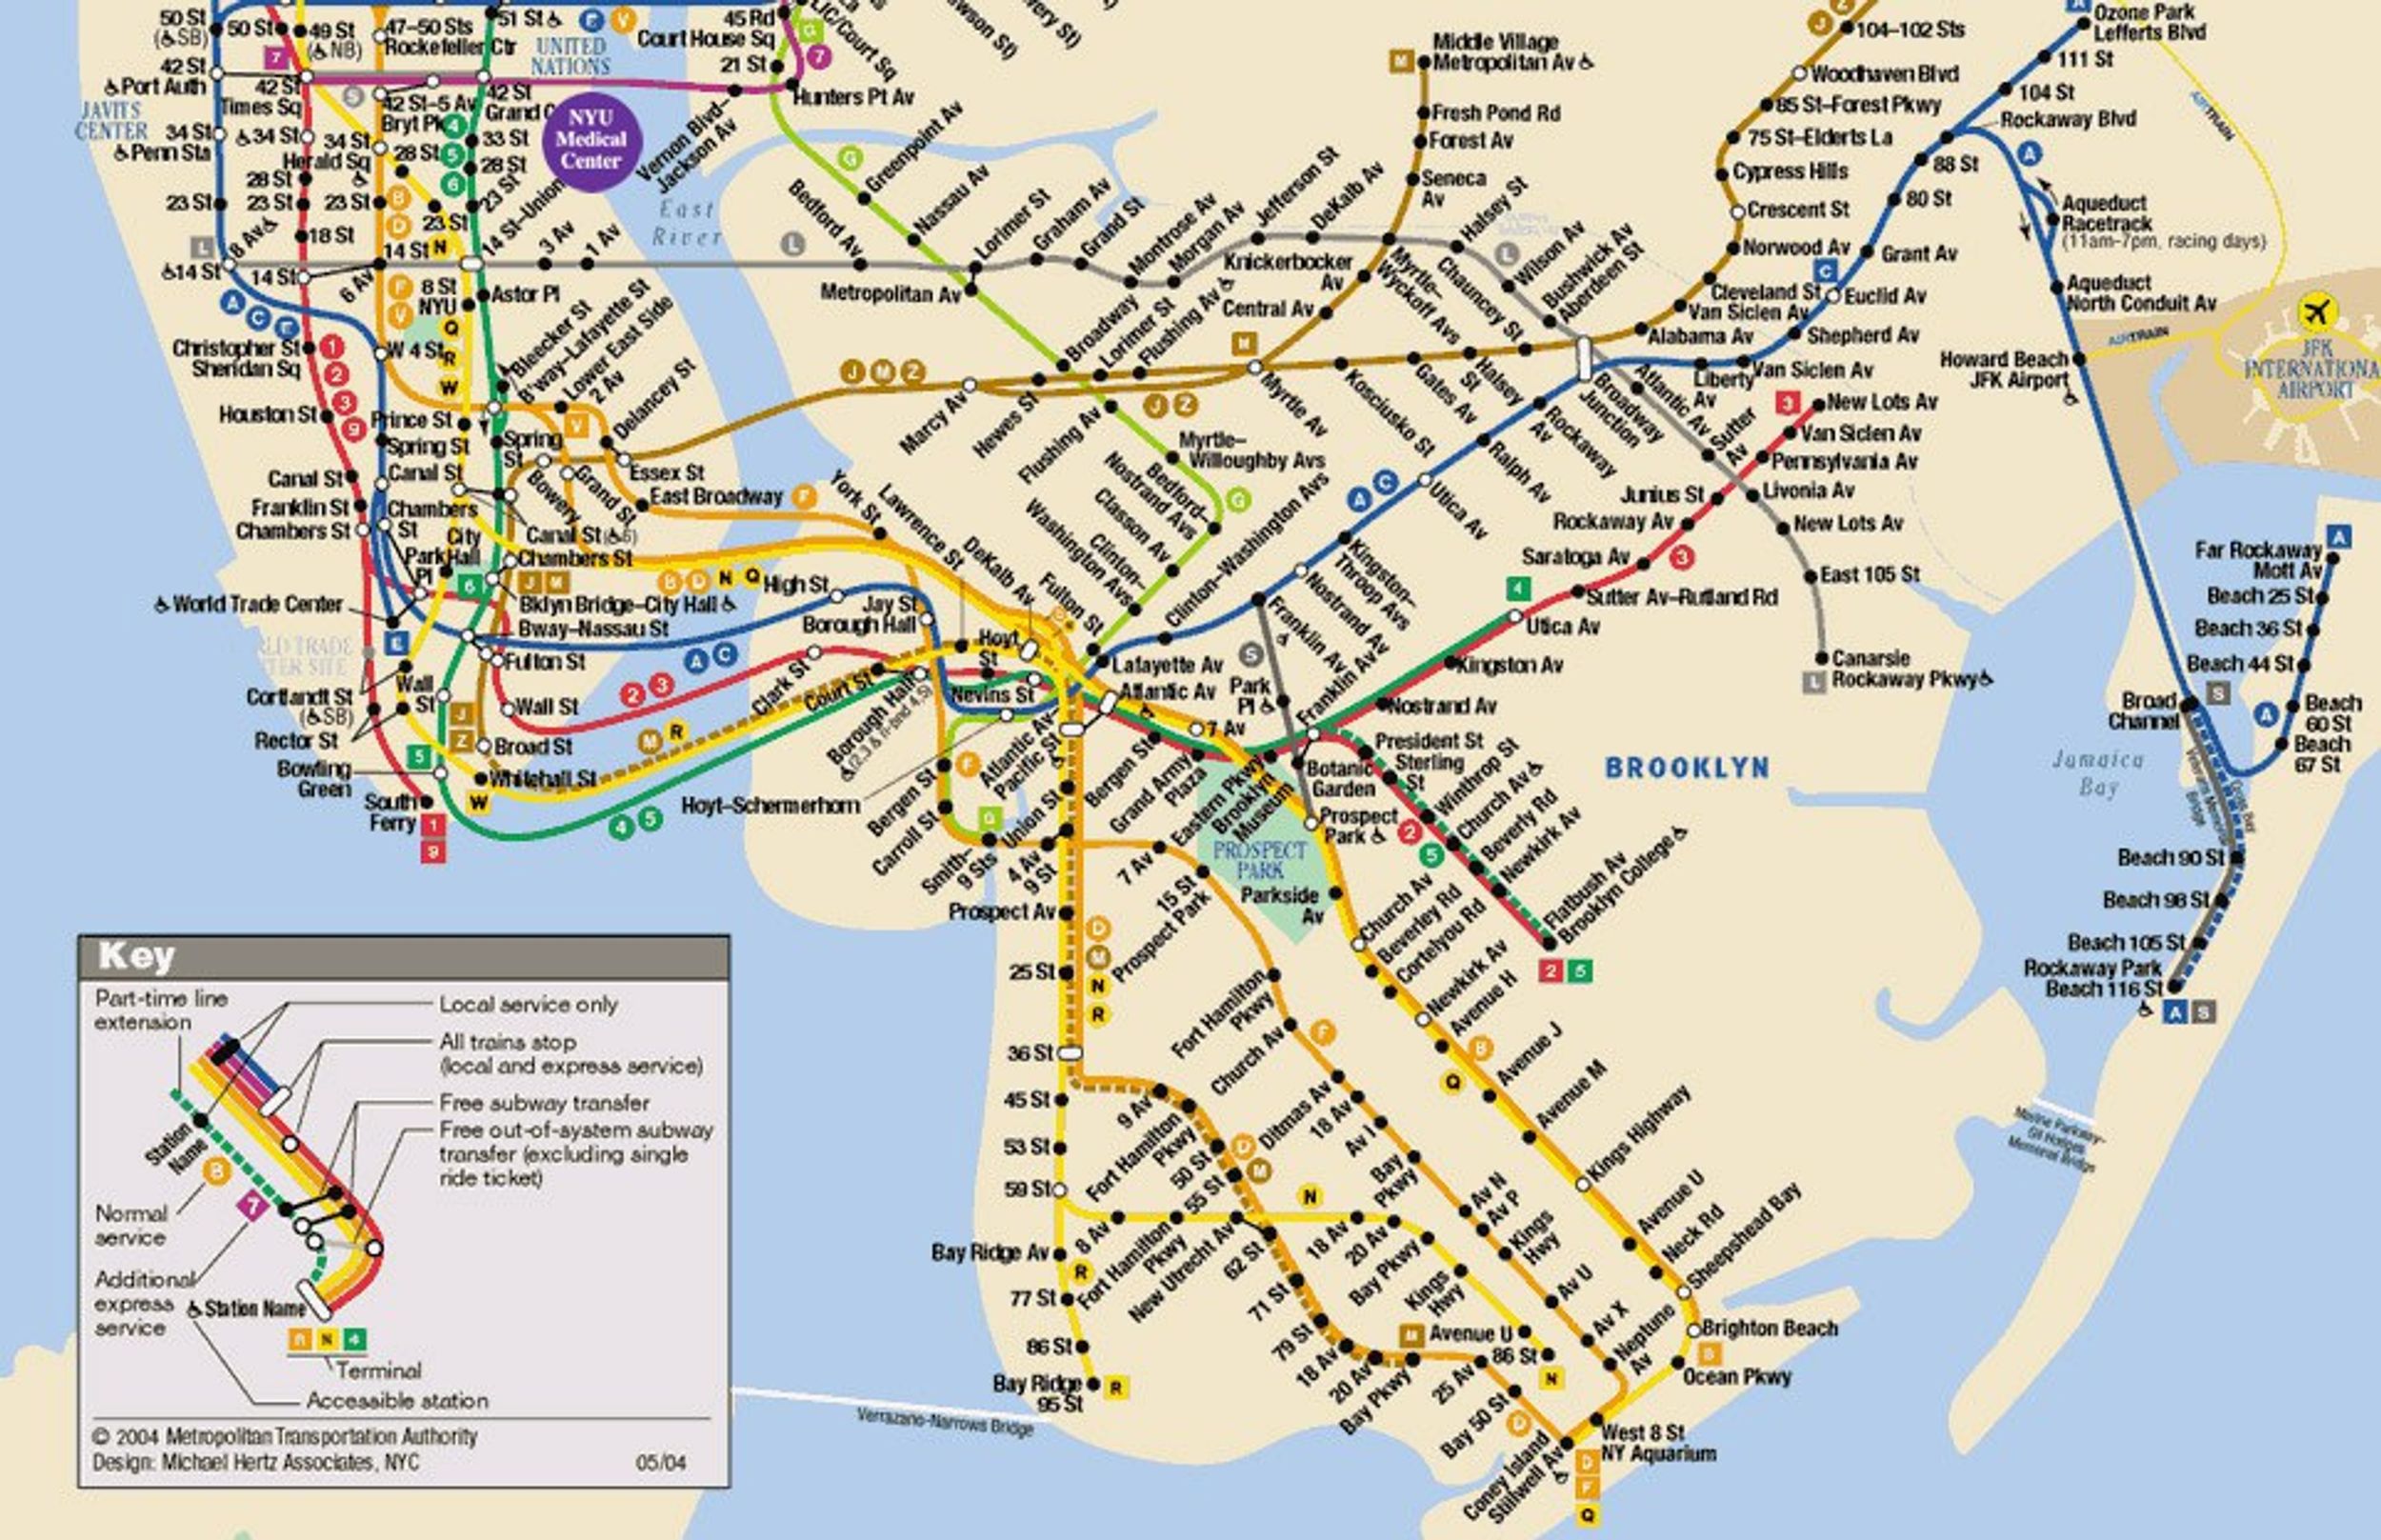 How The New York City Subway Is A Metaphor For Life